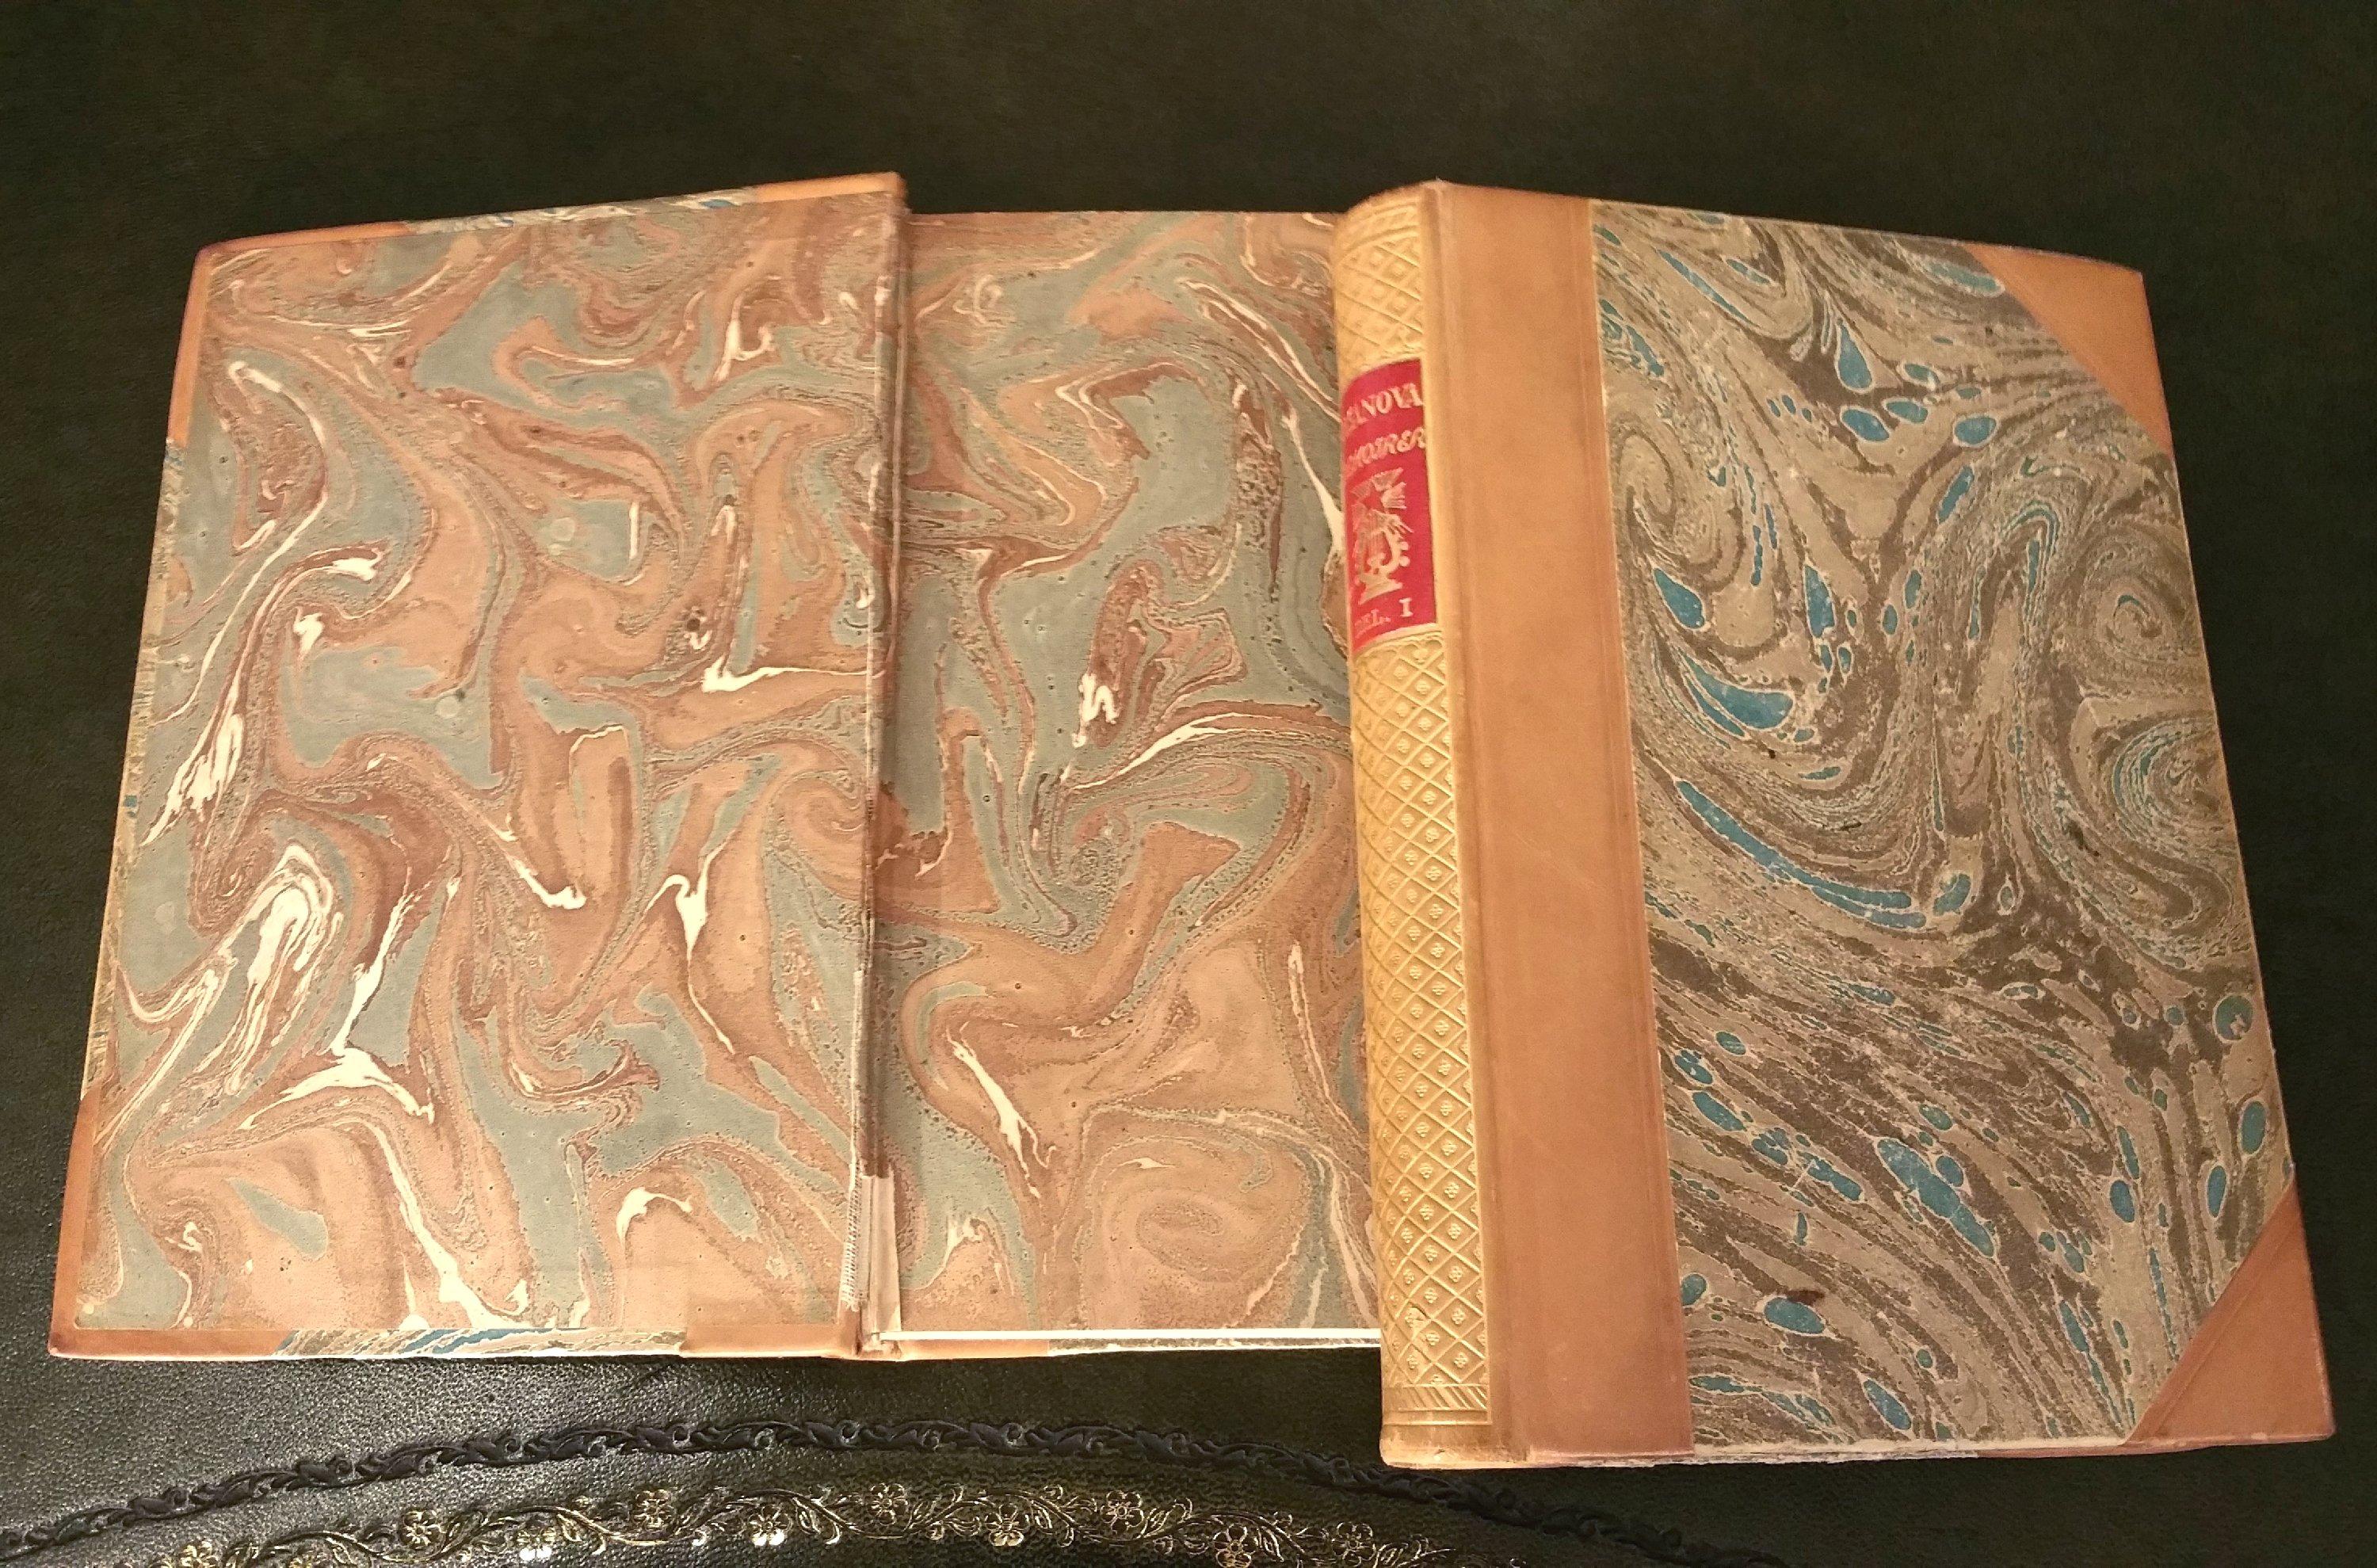 This attractive group of five very attractive leather-bound Swedish Literature books in warm rich tones of dark orange gold with detailed gold leaf embossing are a group of five books titled Casanova, series one thru five by E. Karlholm. Aside from